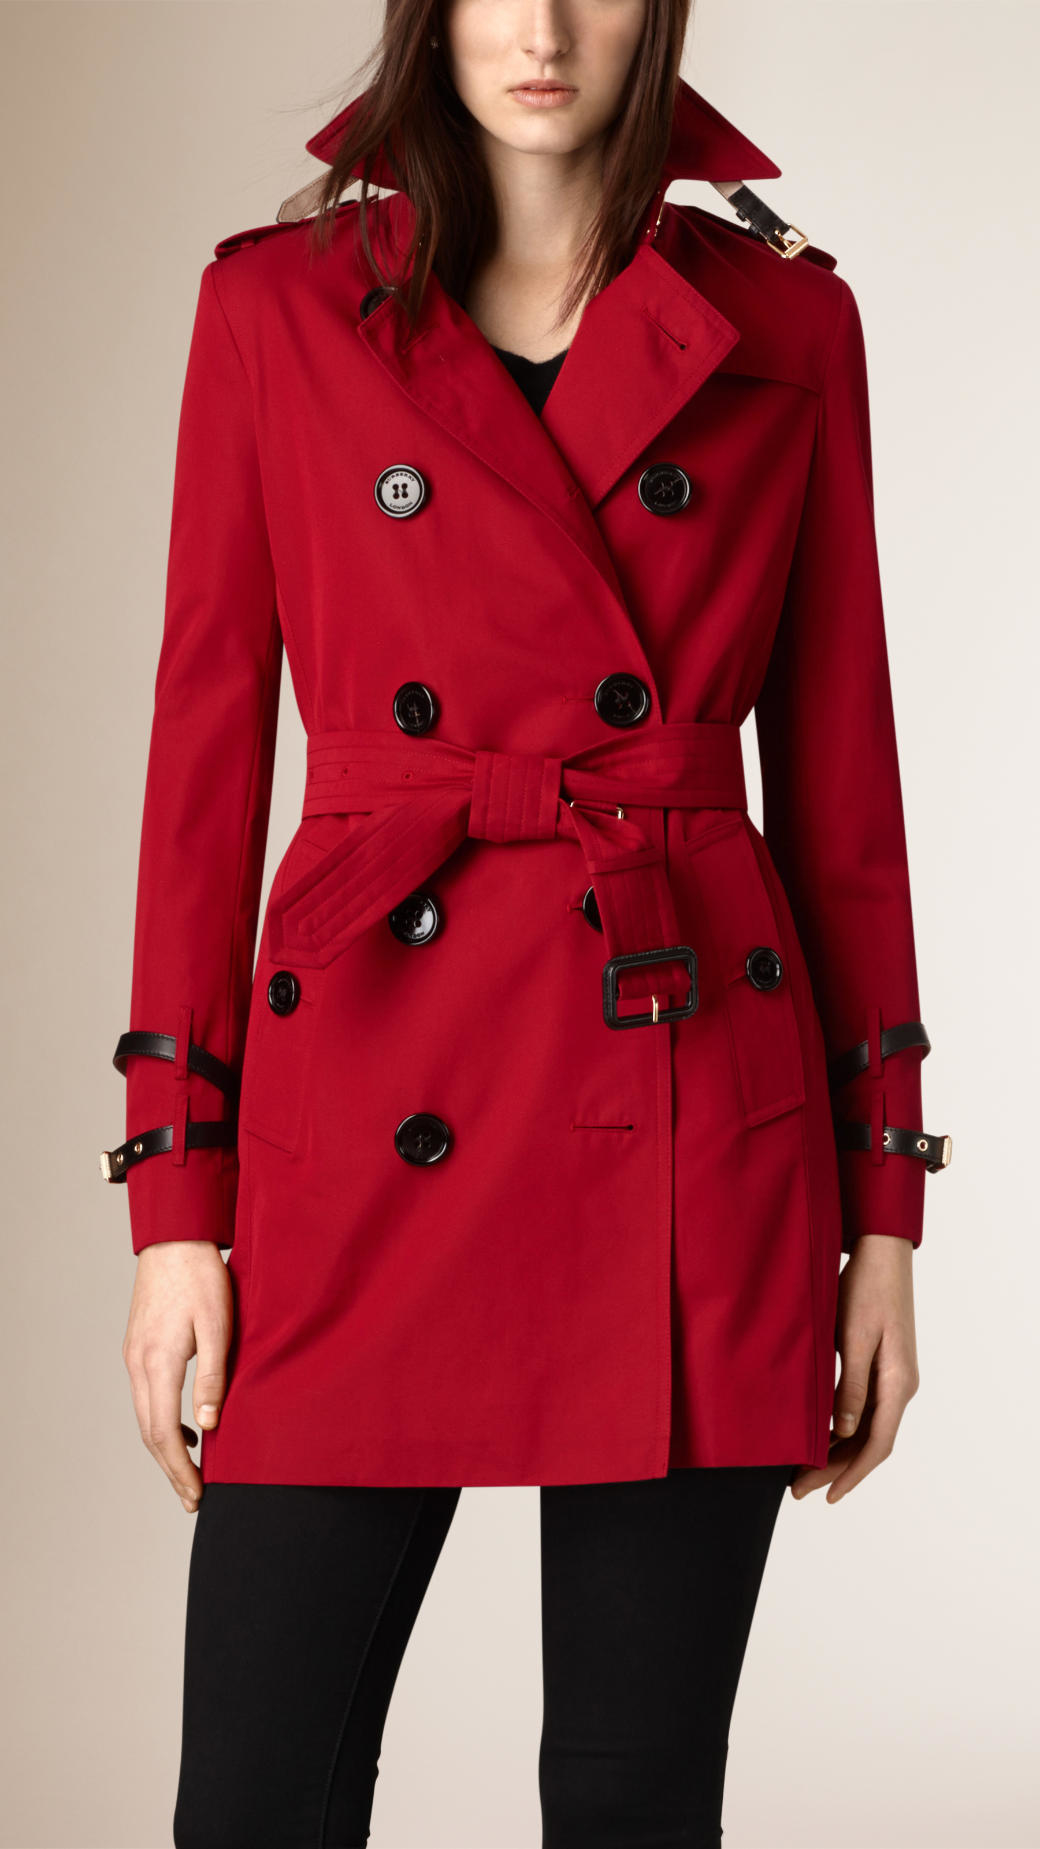 Lyst - Burberry Leather Trim Cotton Gabardine Trench Coat in Red